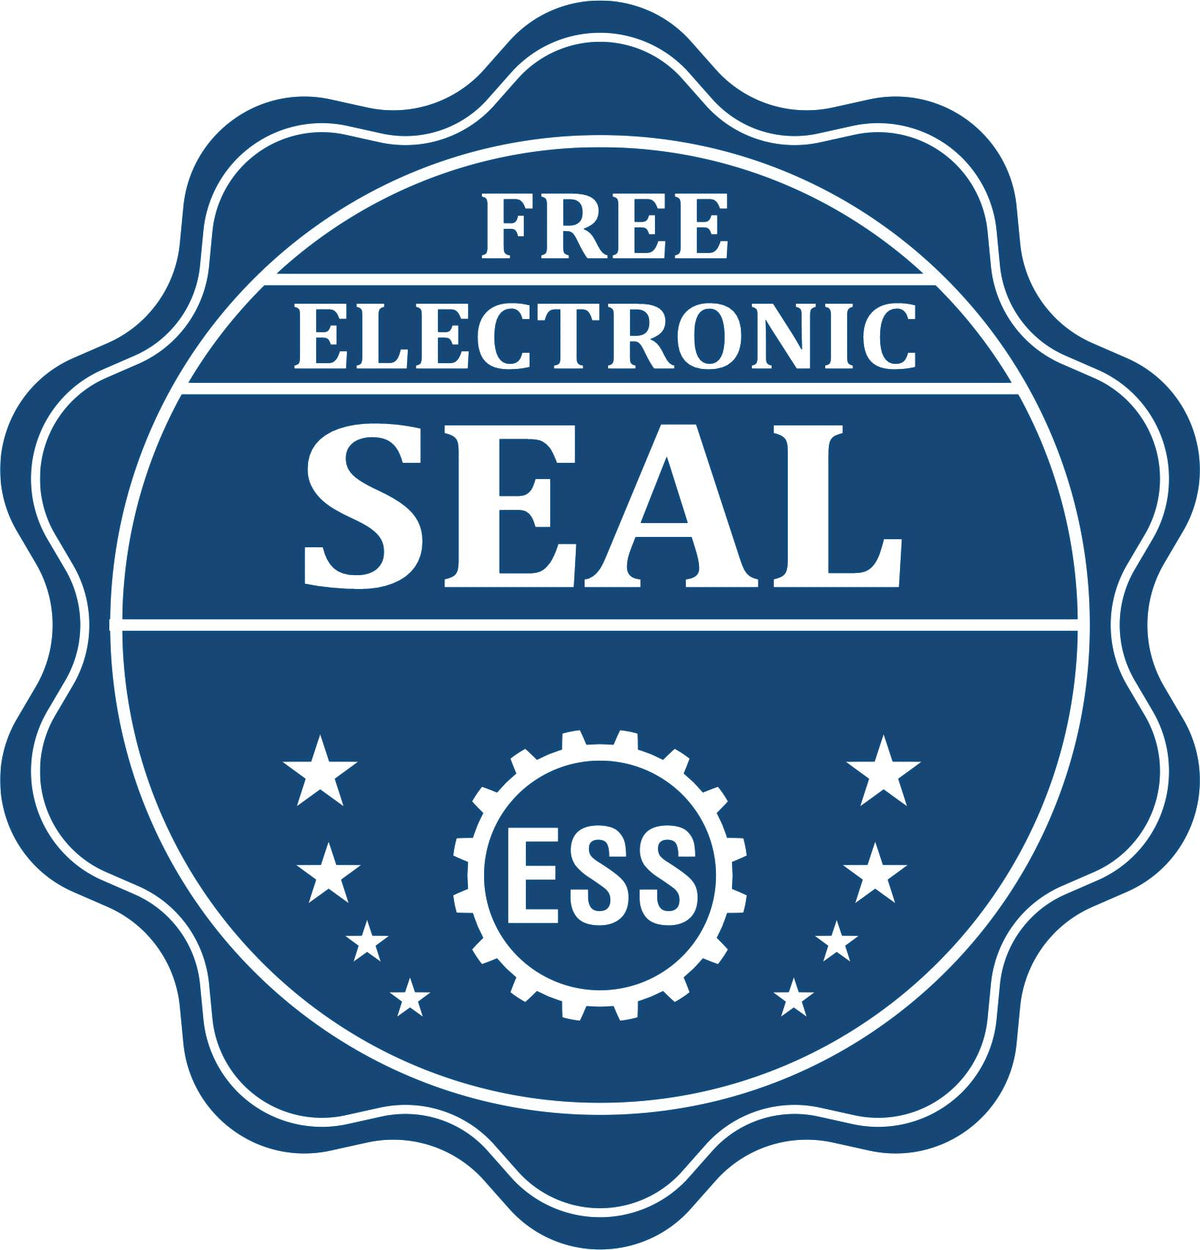 A badge showing a free electronic seal for the MaxLight Premium Pre-Inked Utah State Seal Notarial Stamp with stars and the ESS gear on the emblem.